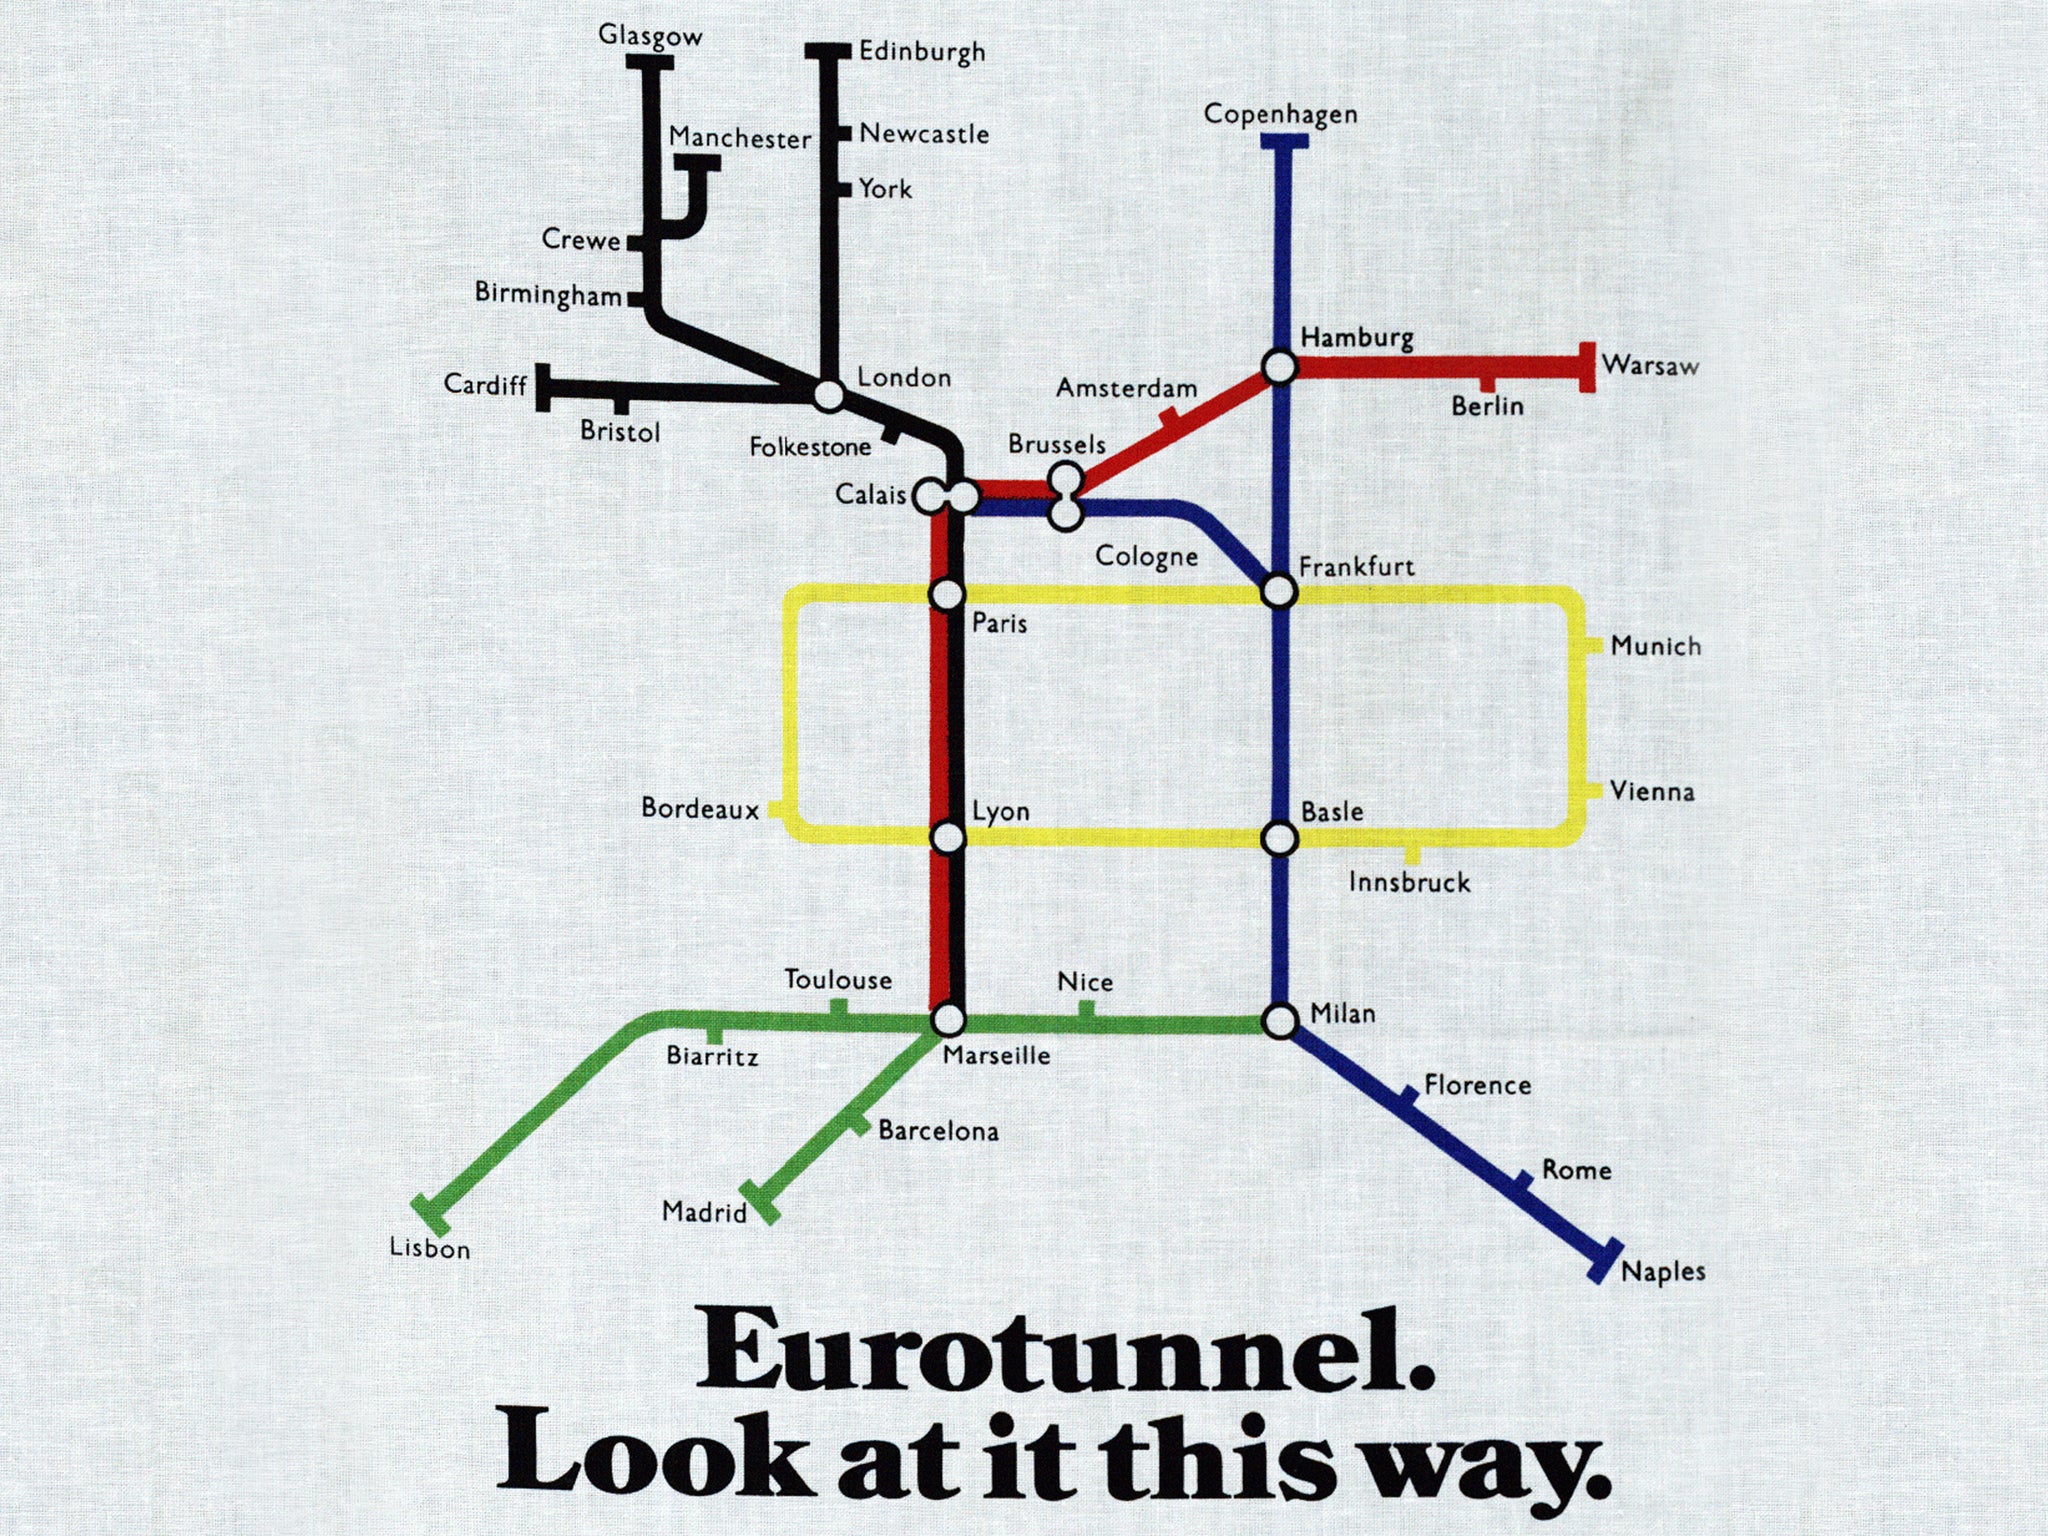 One advert for north of London services likened international rail travel to the Tube network